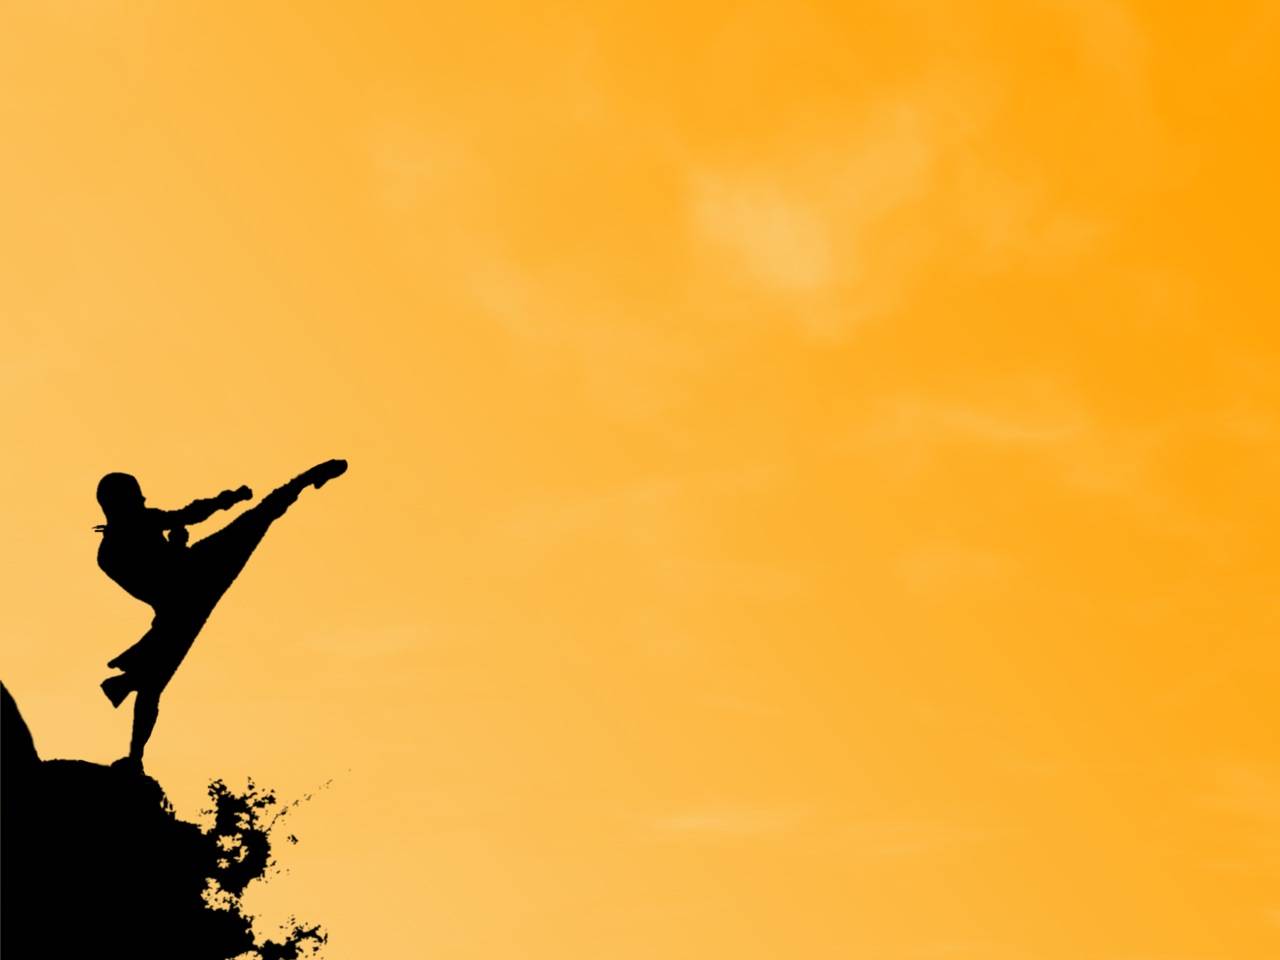 shaolin kung fu wallpaper,people in nature,sky,yellow,happy,silhouette